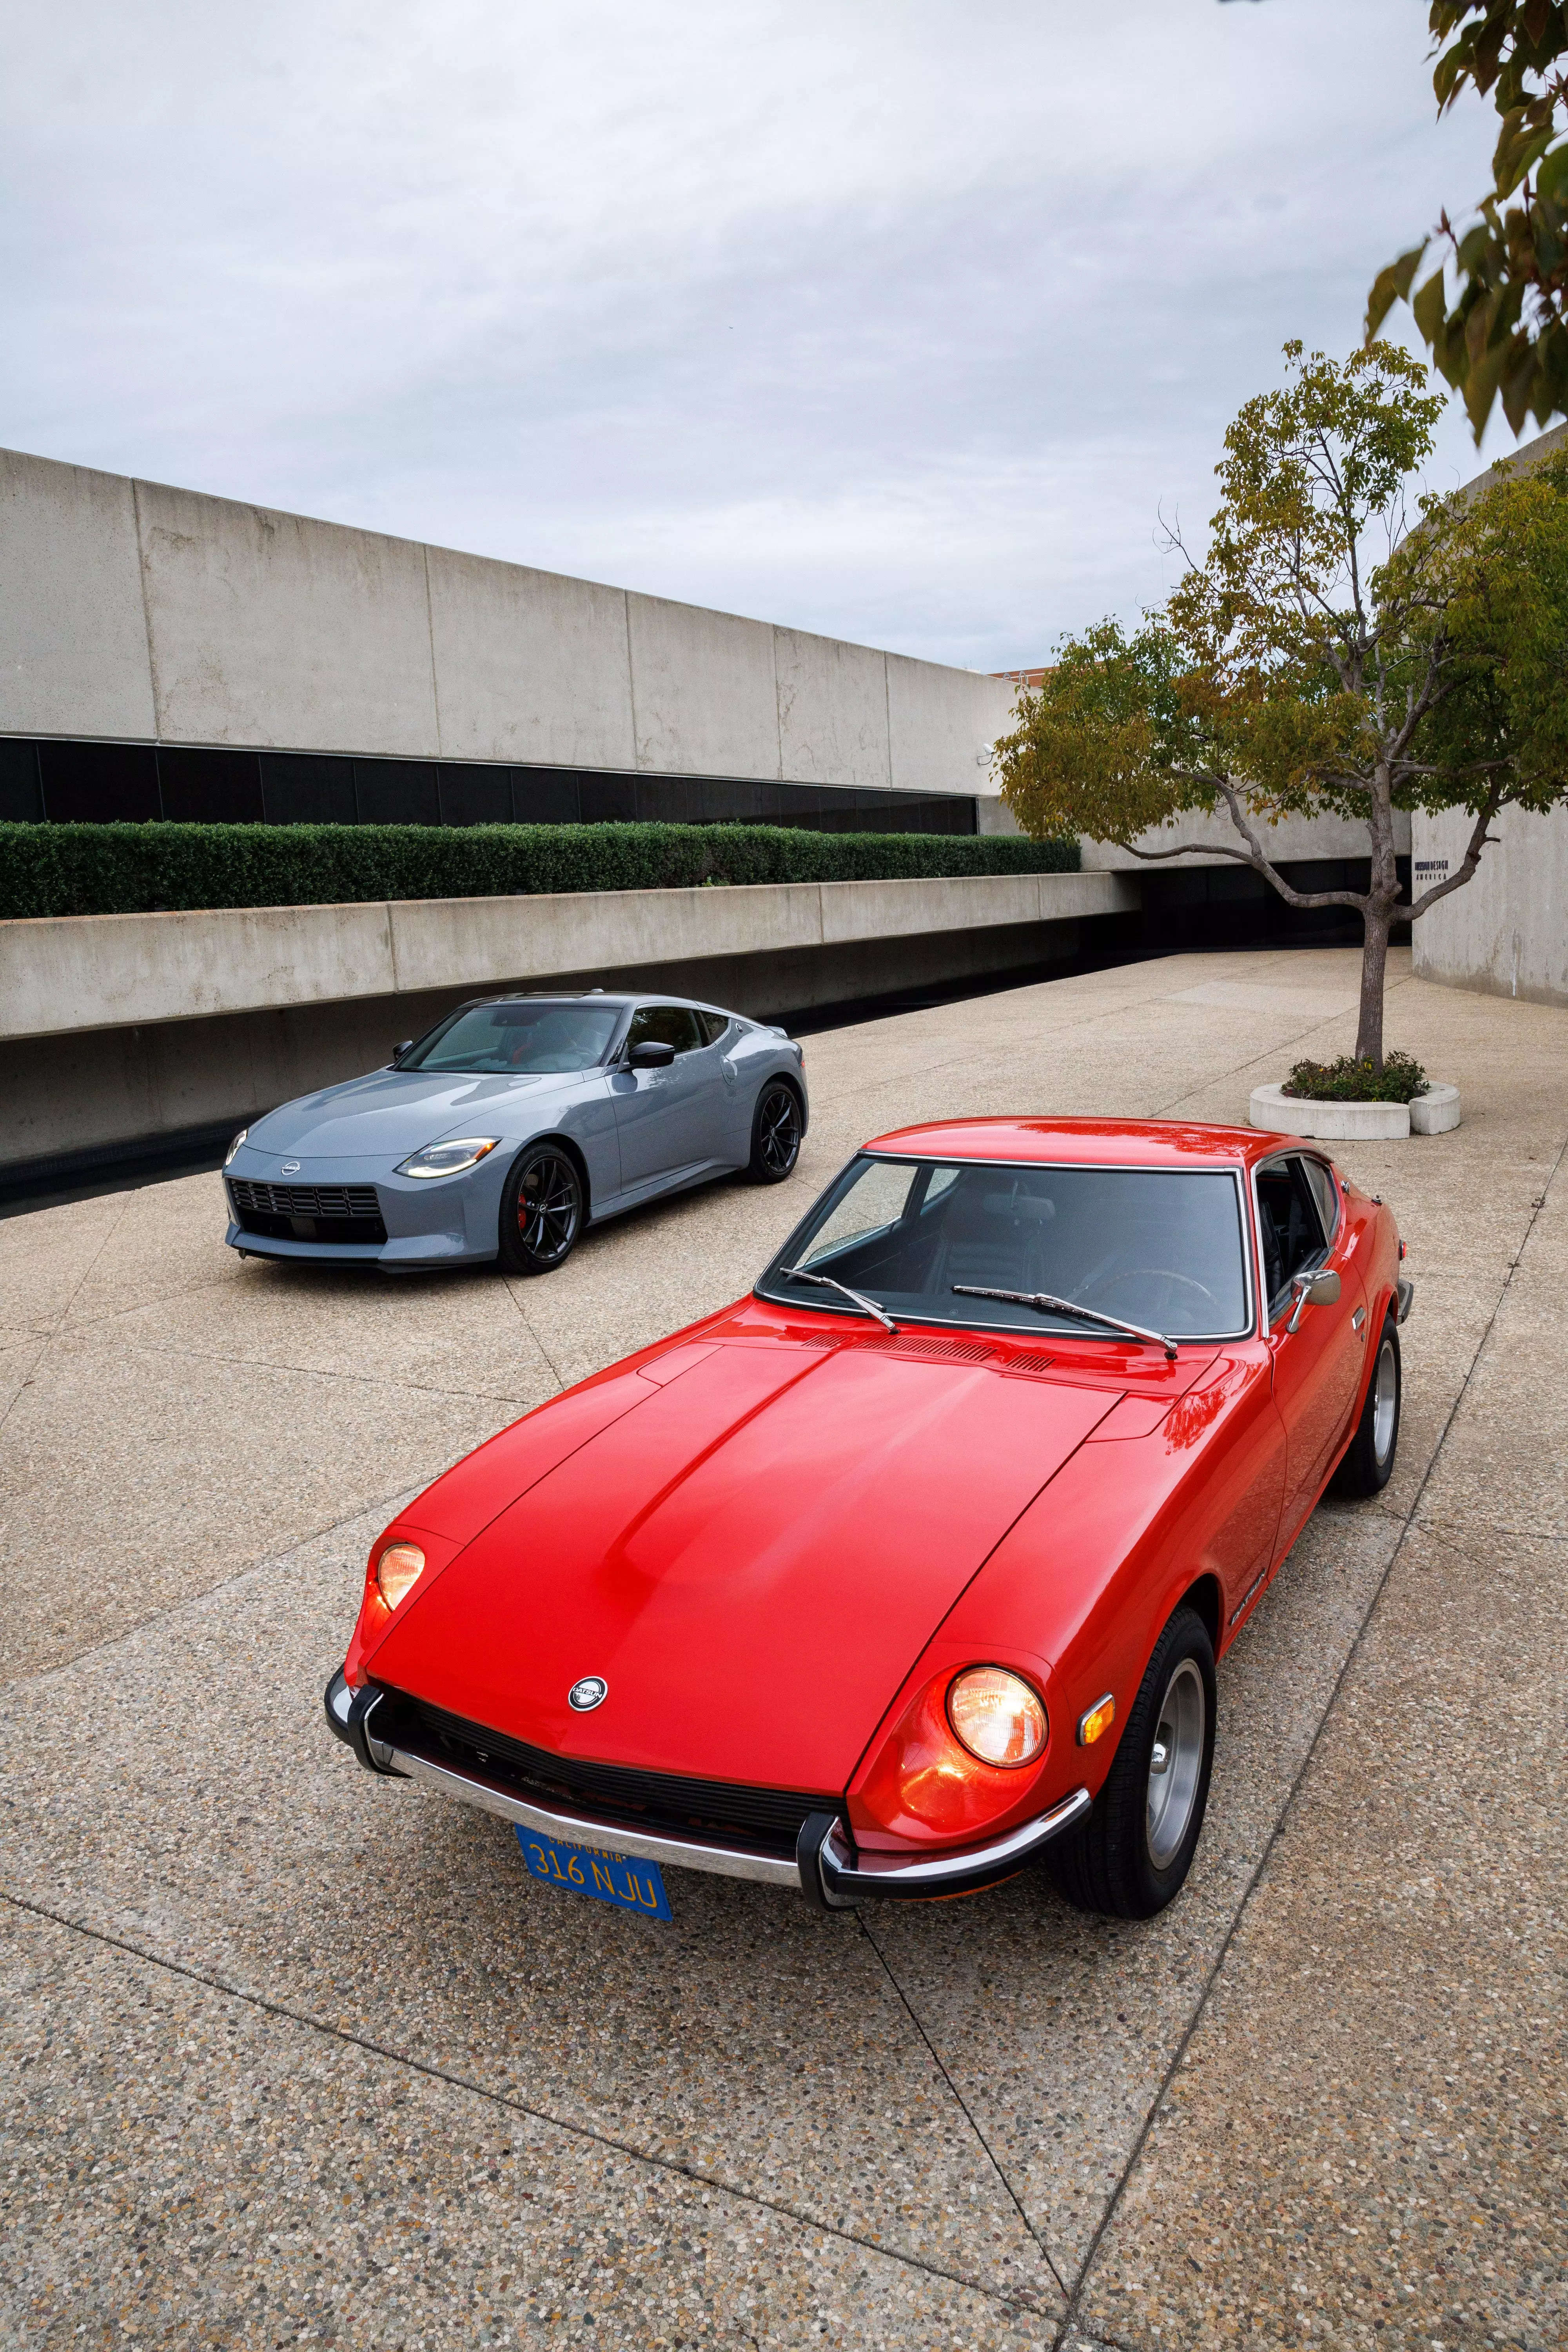 The new Nissan Z with the original Datsun 240Z